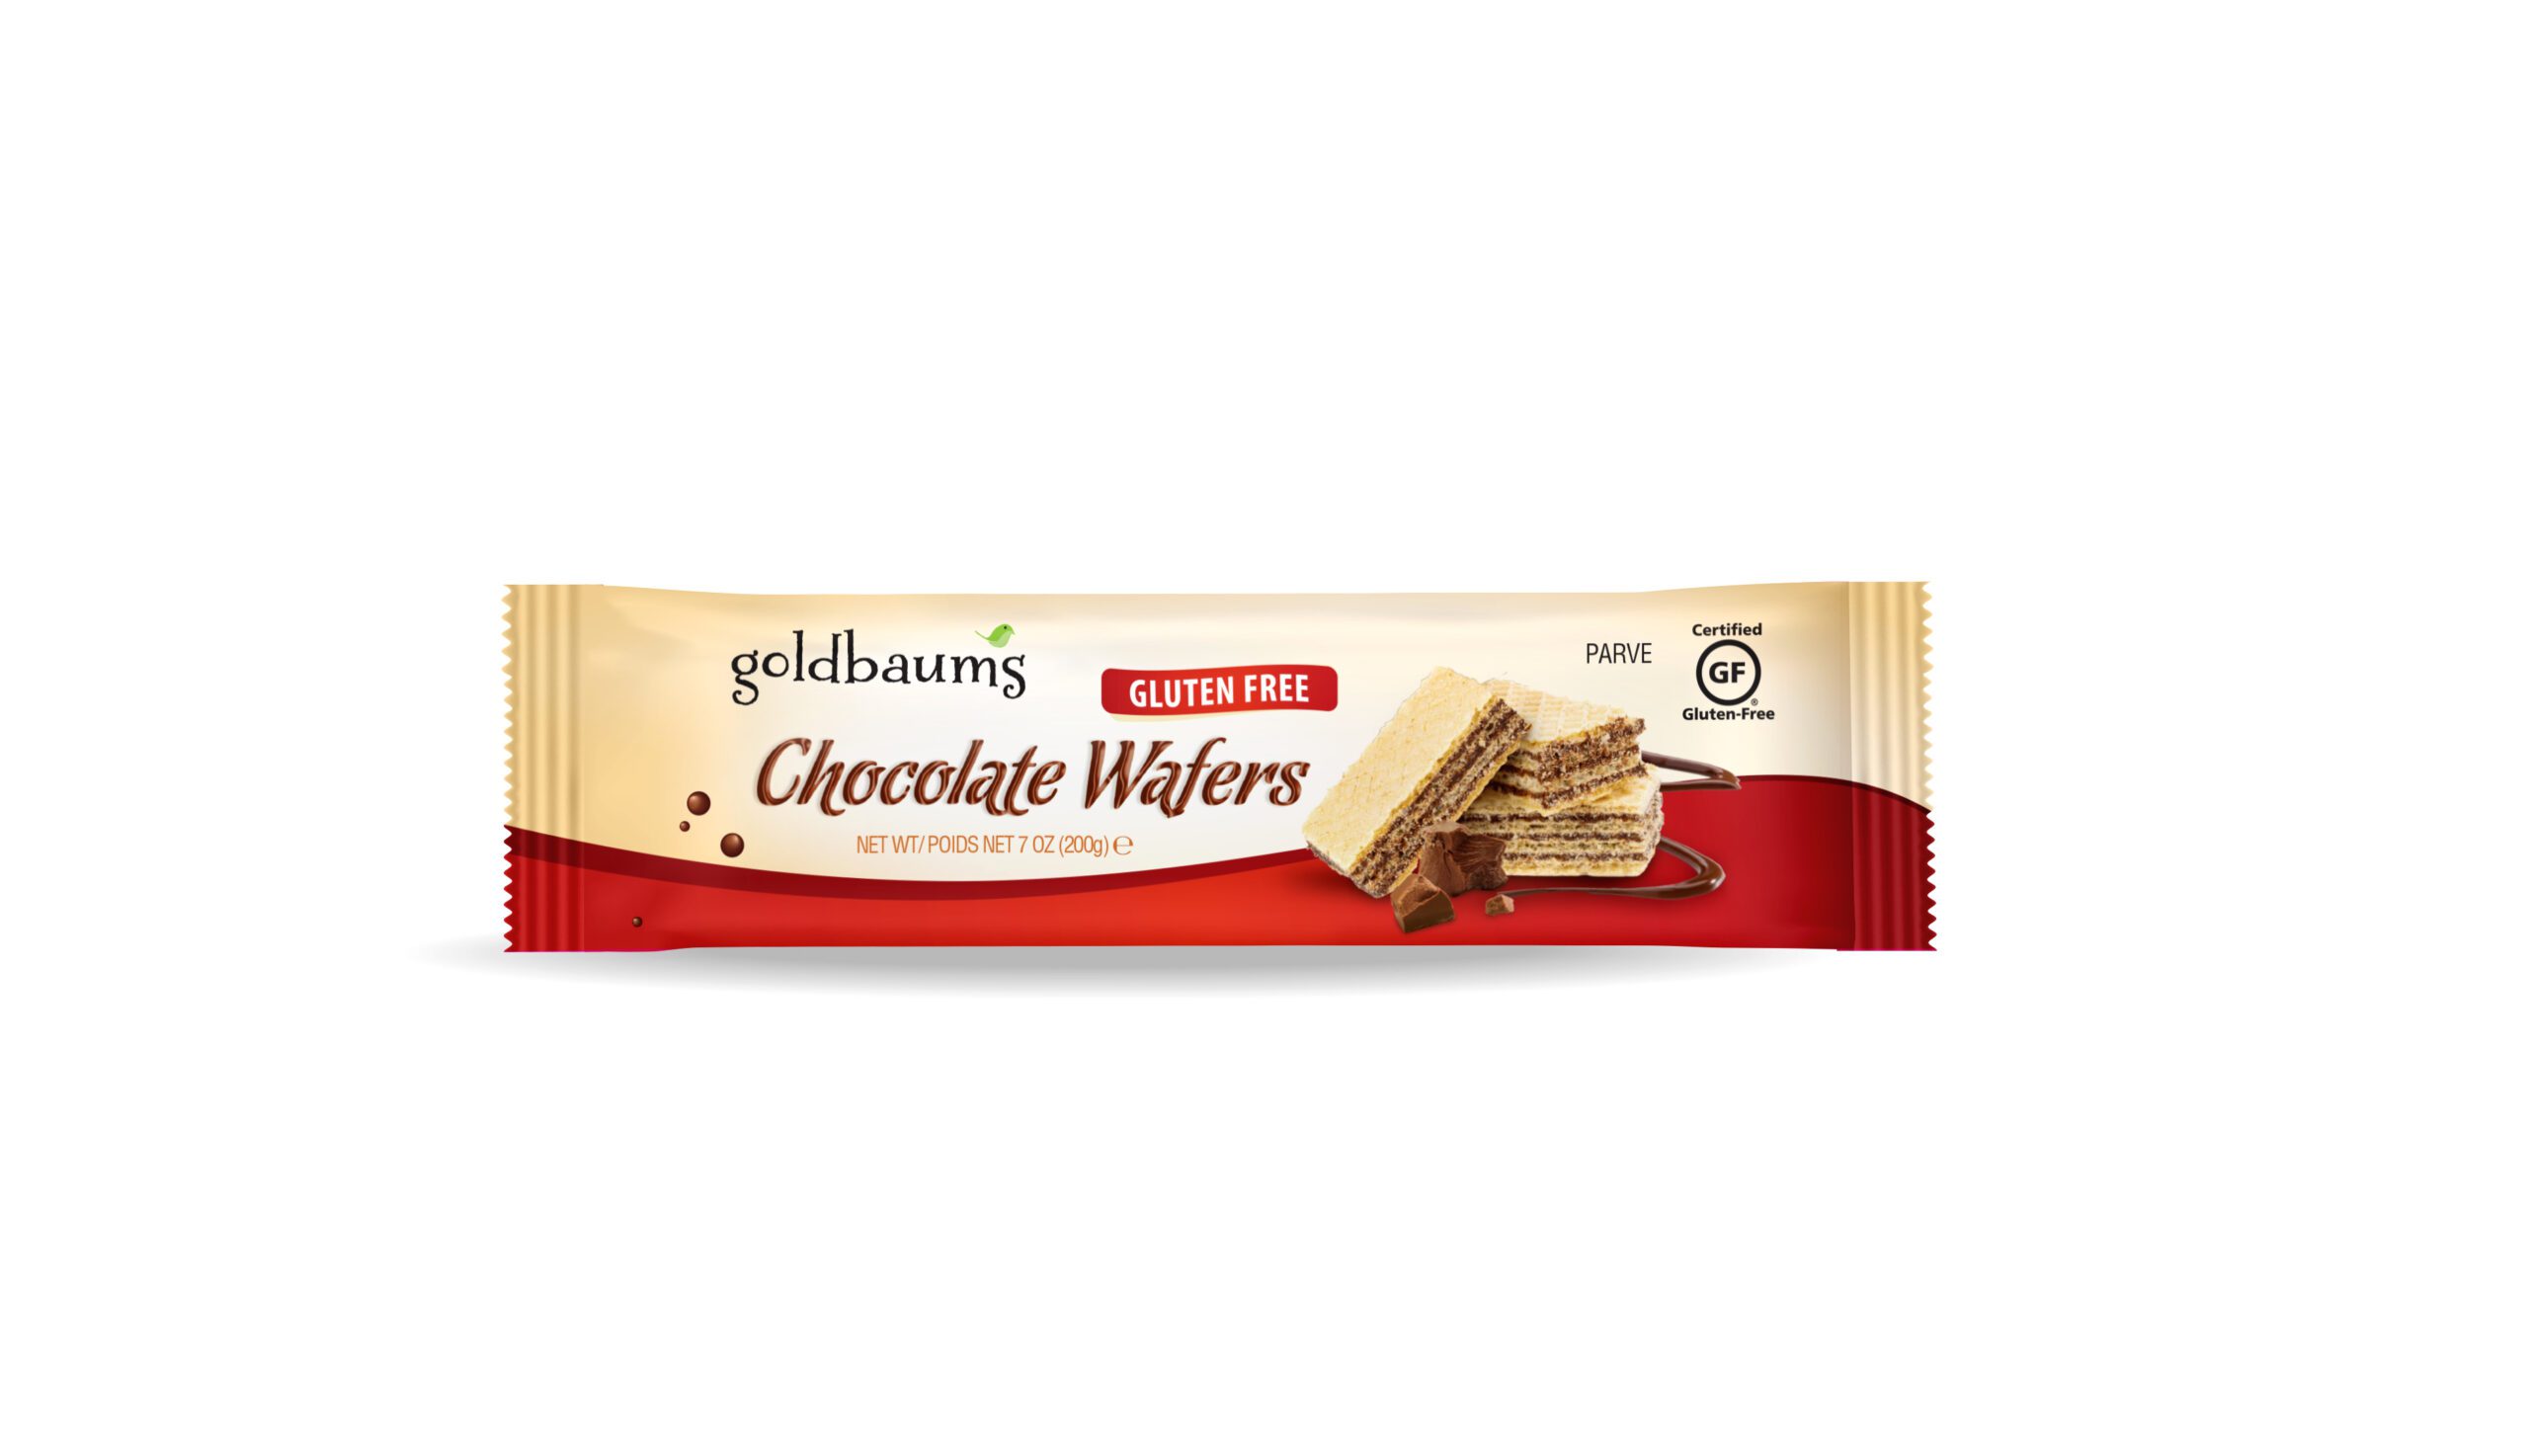 GOLDBAUMS CHOCOLATE WAFERS UNCOATED